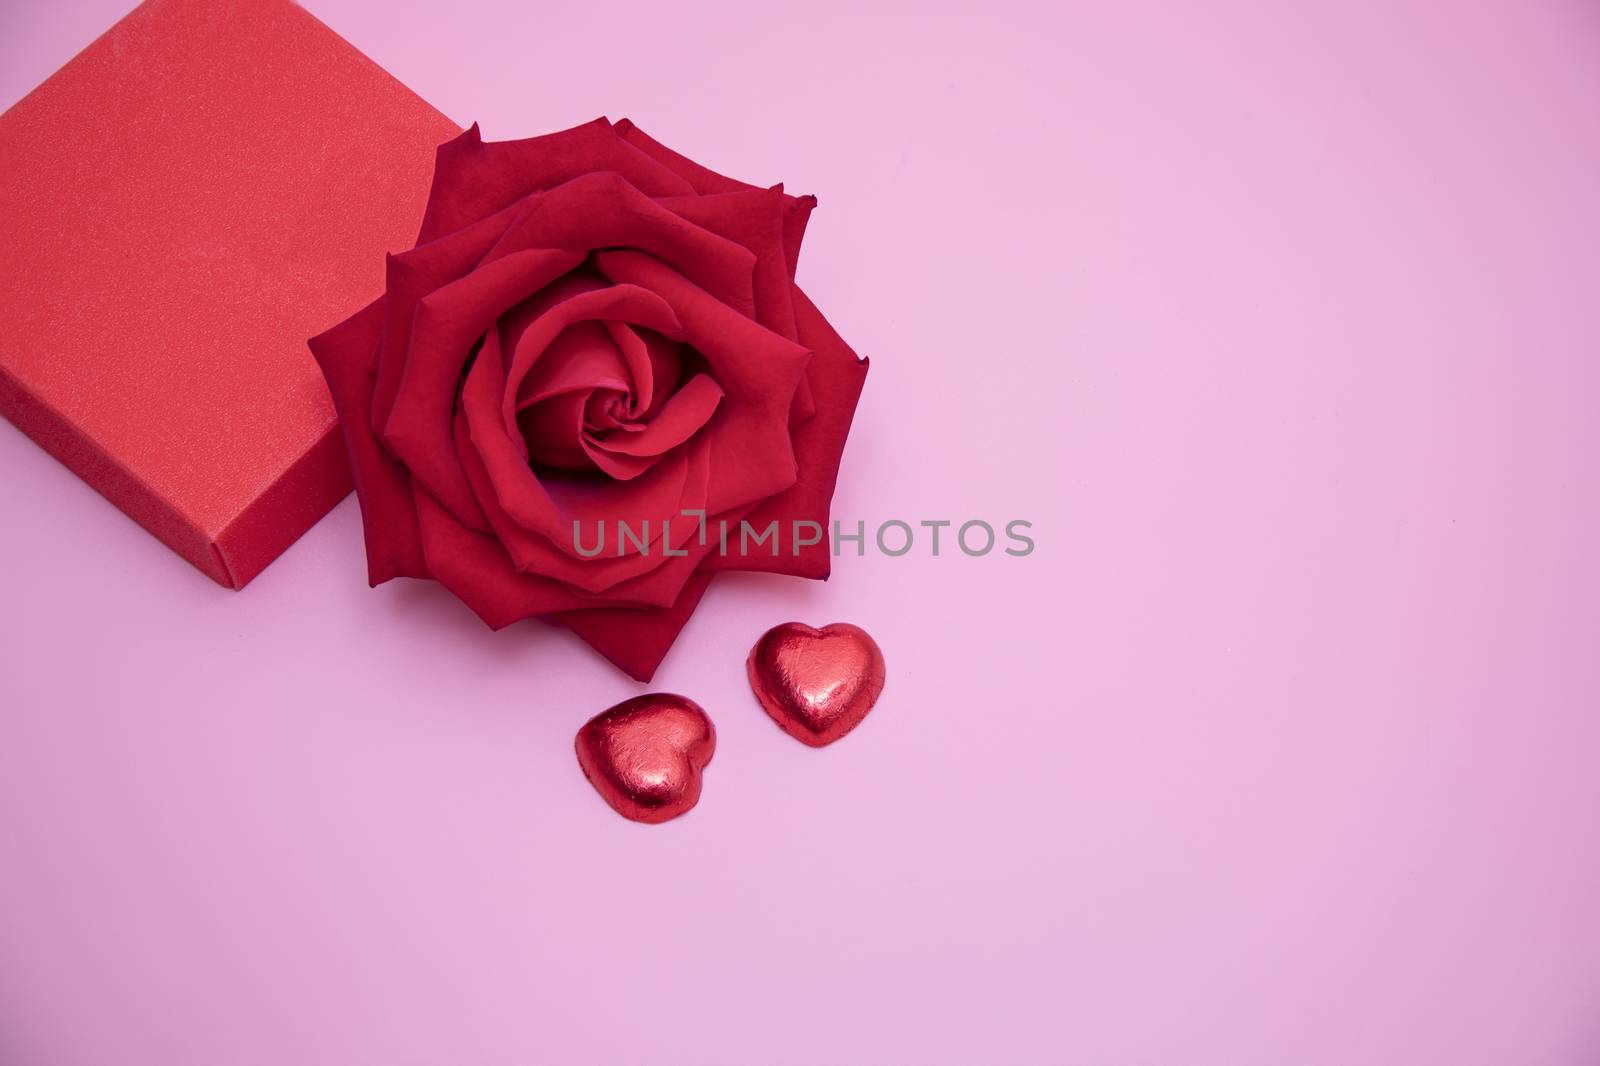 Closeup of a red rose with two chocolate candy hearts and a red gift box on pink background. Valentine's, anniversary, wedding concept.